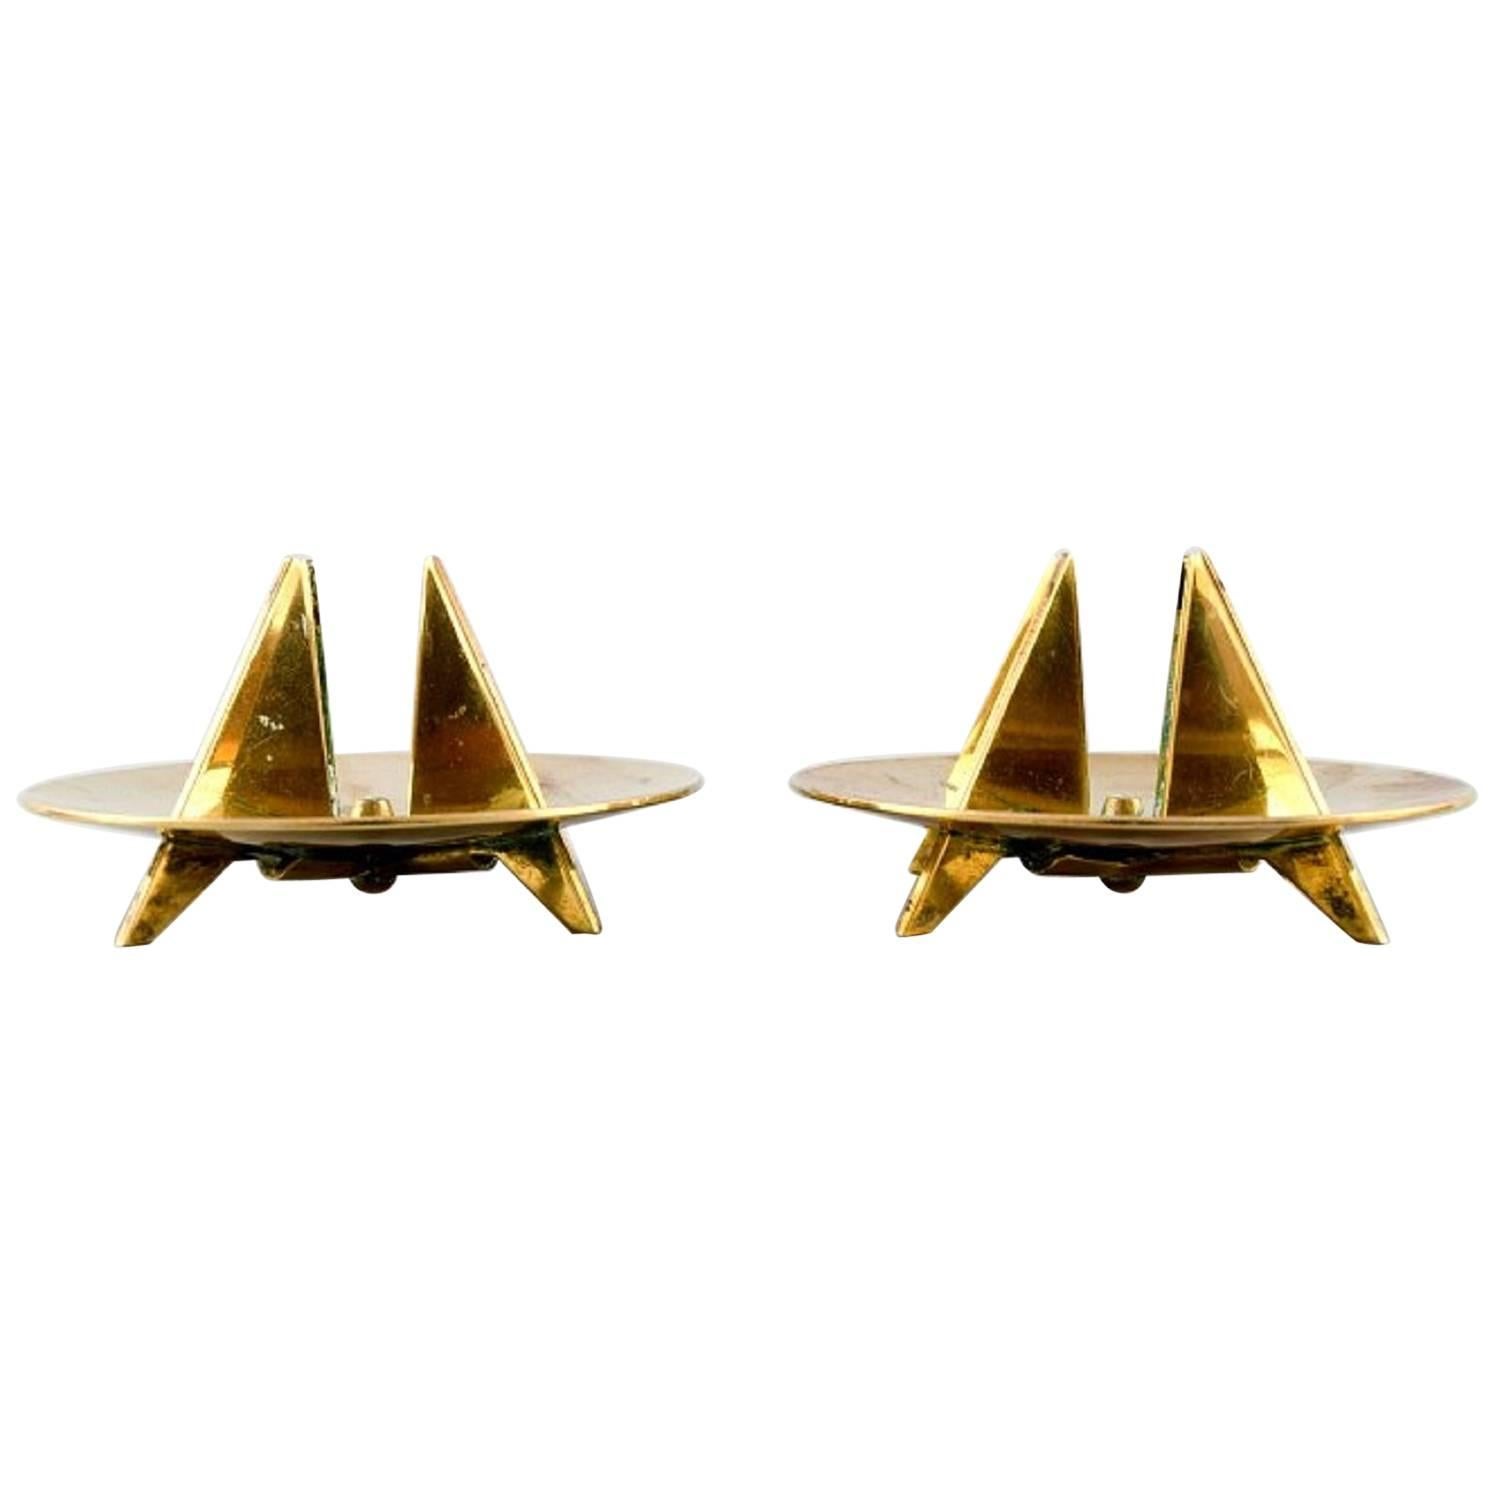 Pair of Sculptural Candle Holders Designed by Pierre Forsell for Skultuna